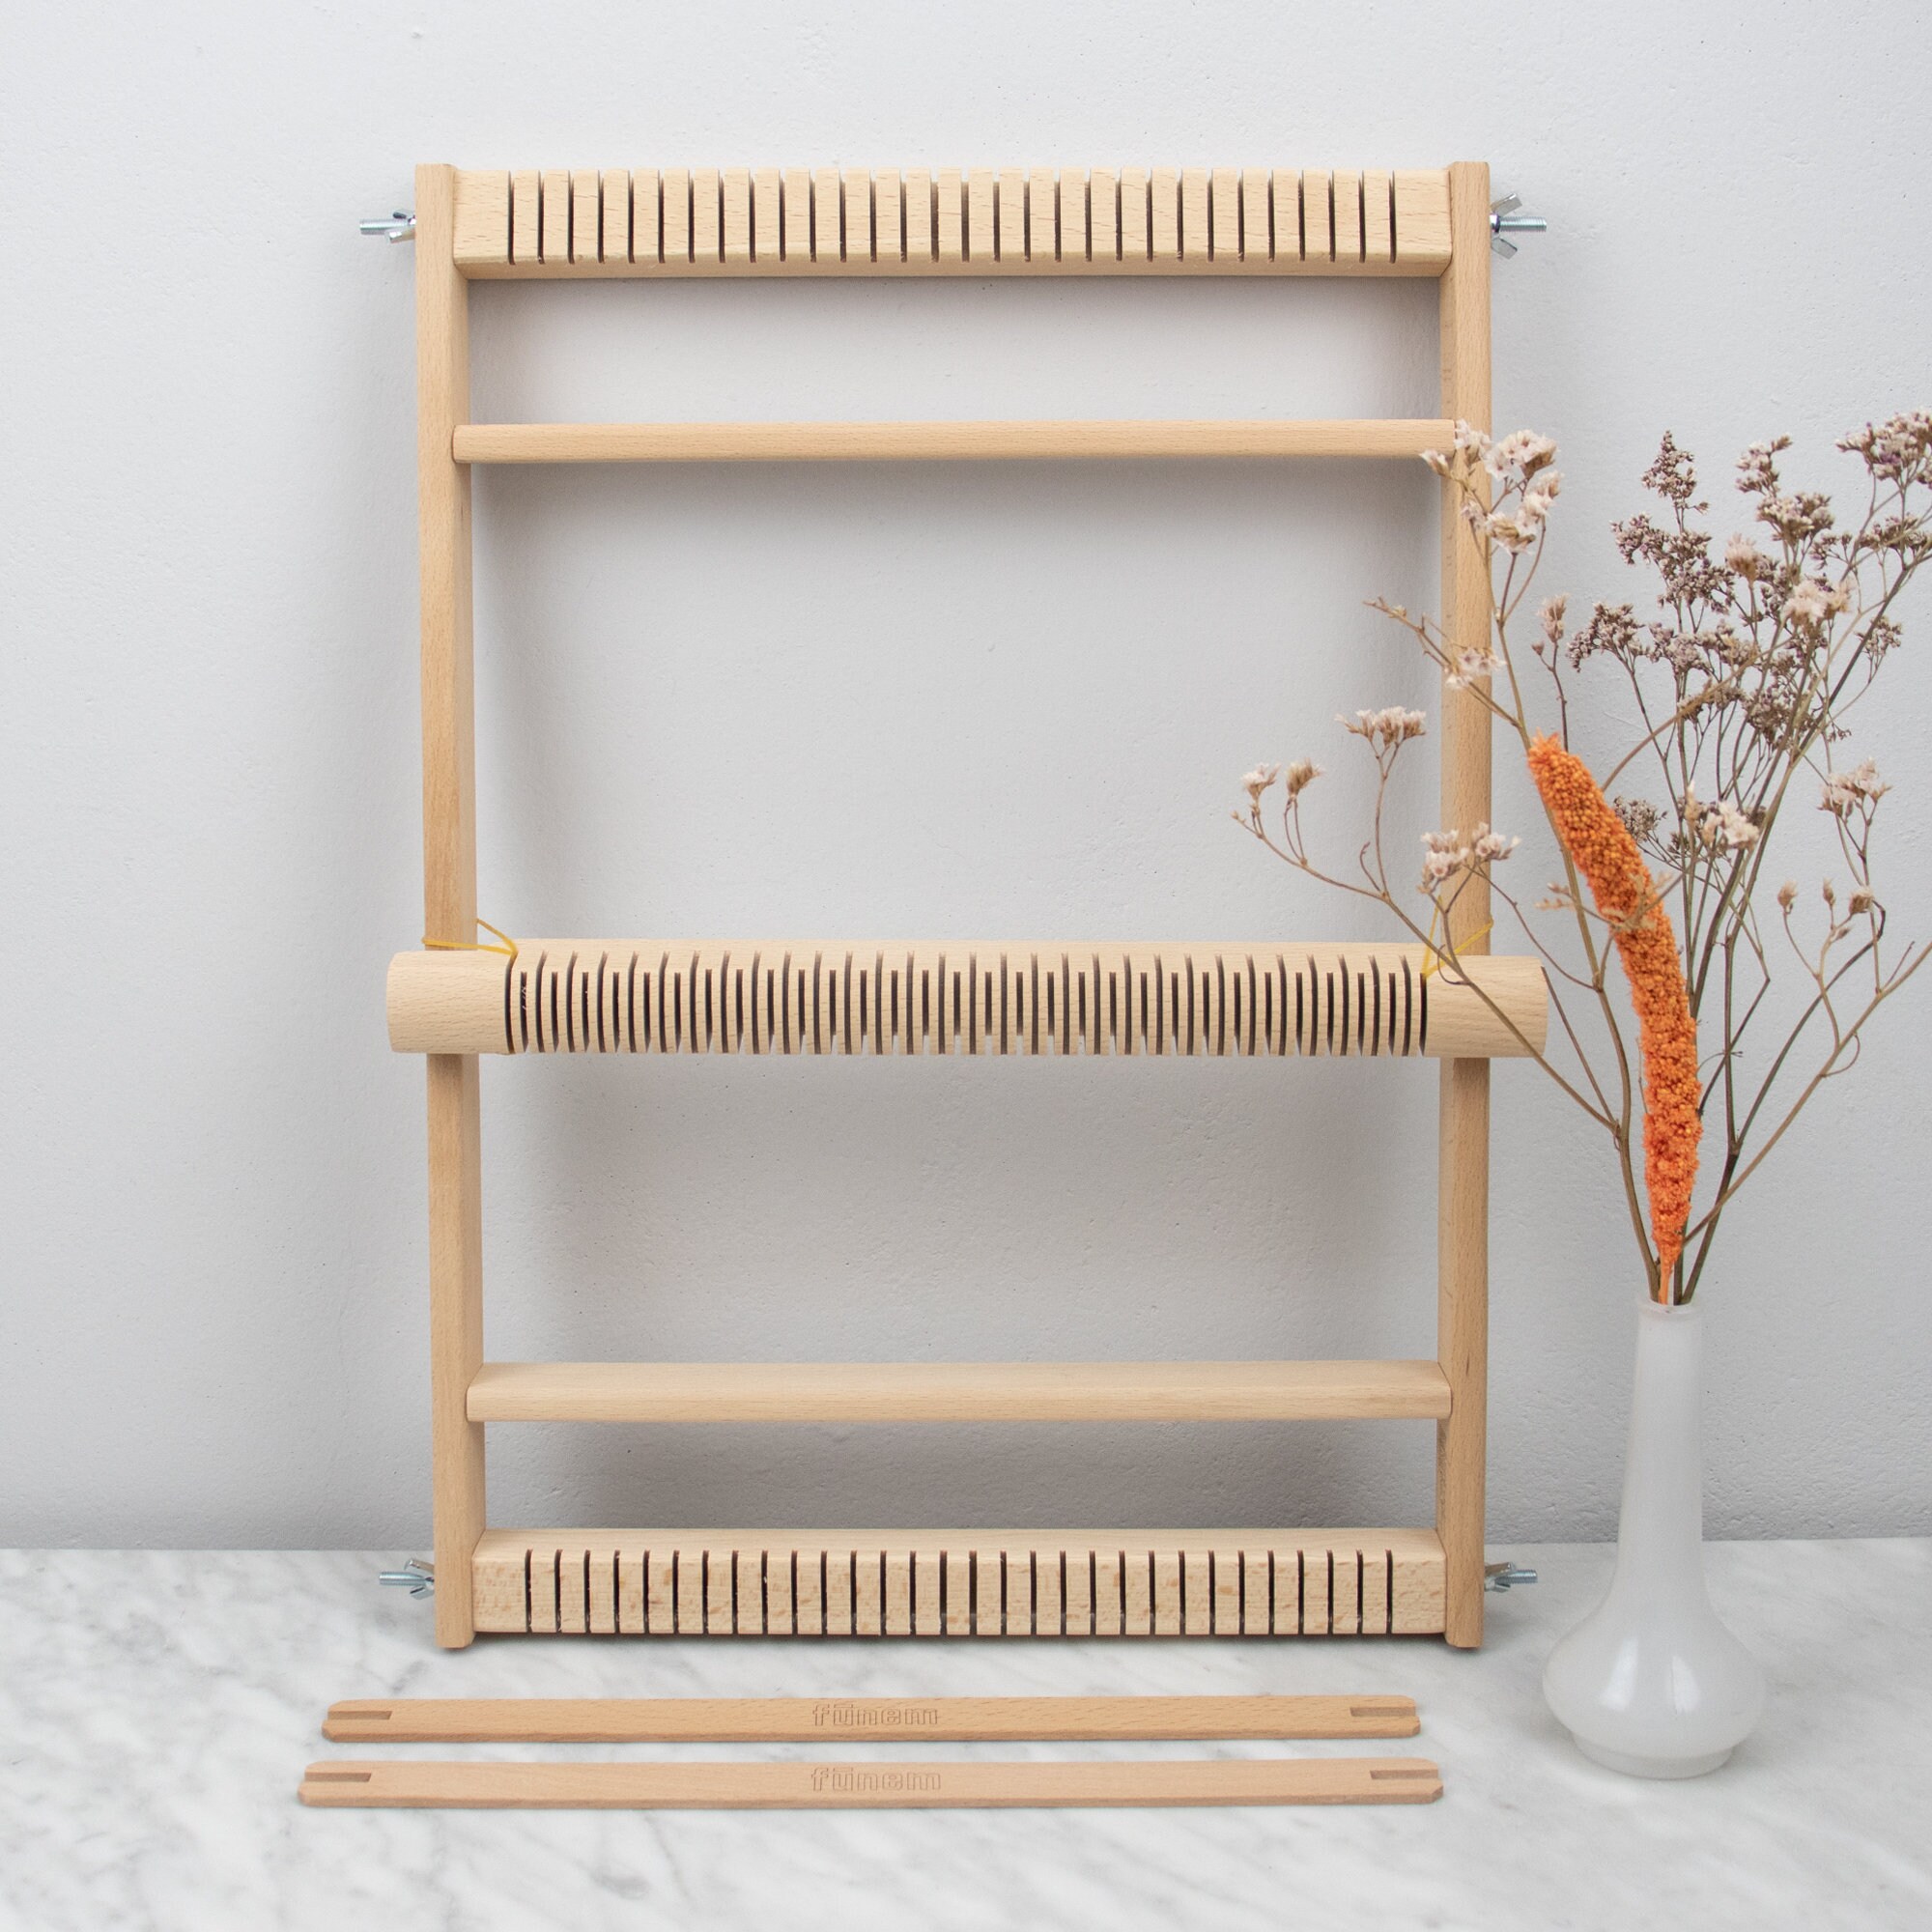 X Large Weaving Loom Kit, Also Known as Tapestry Weave Loom Lap Heddle Loom  With Stand, Weave Frame Loom, for Beginners DIY 